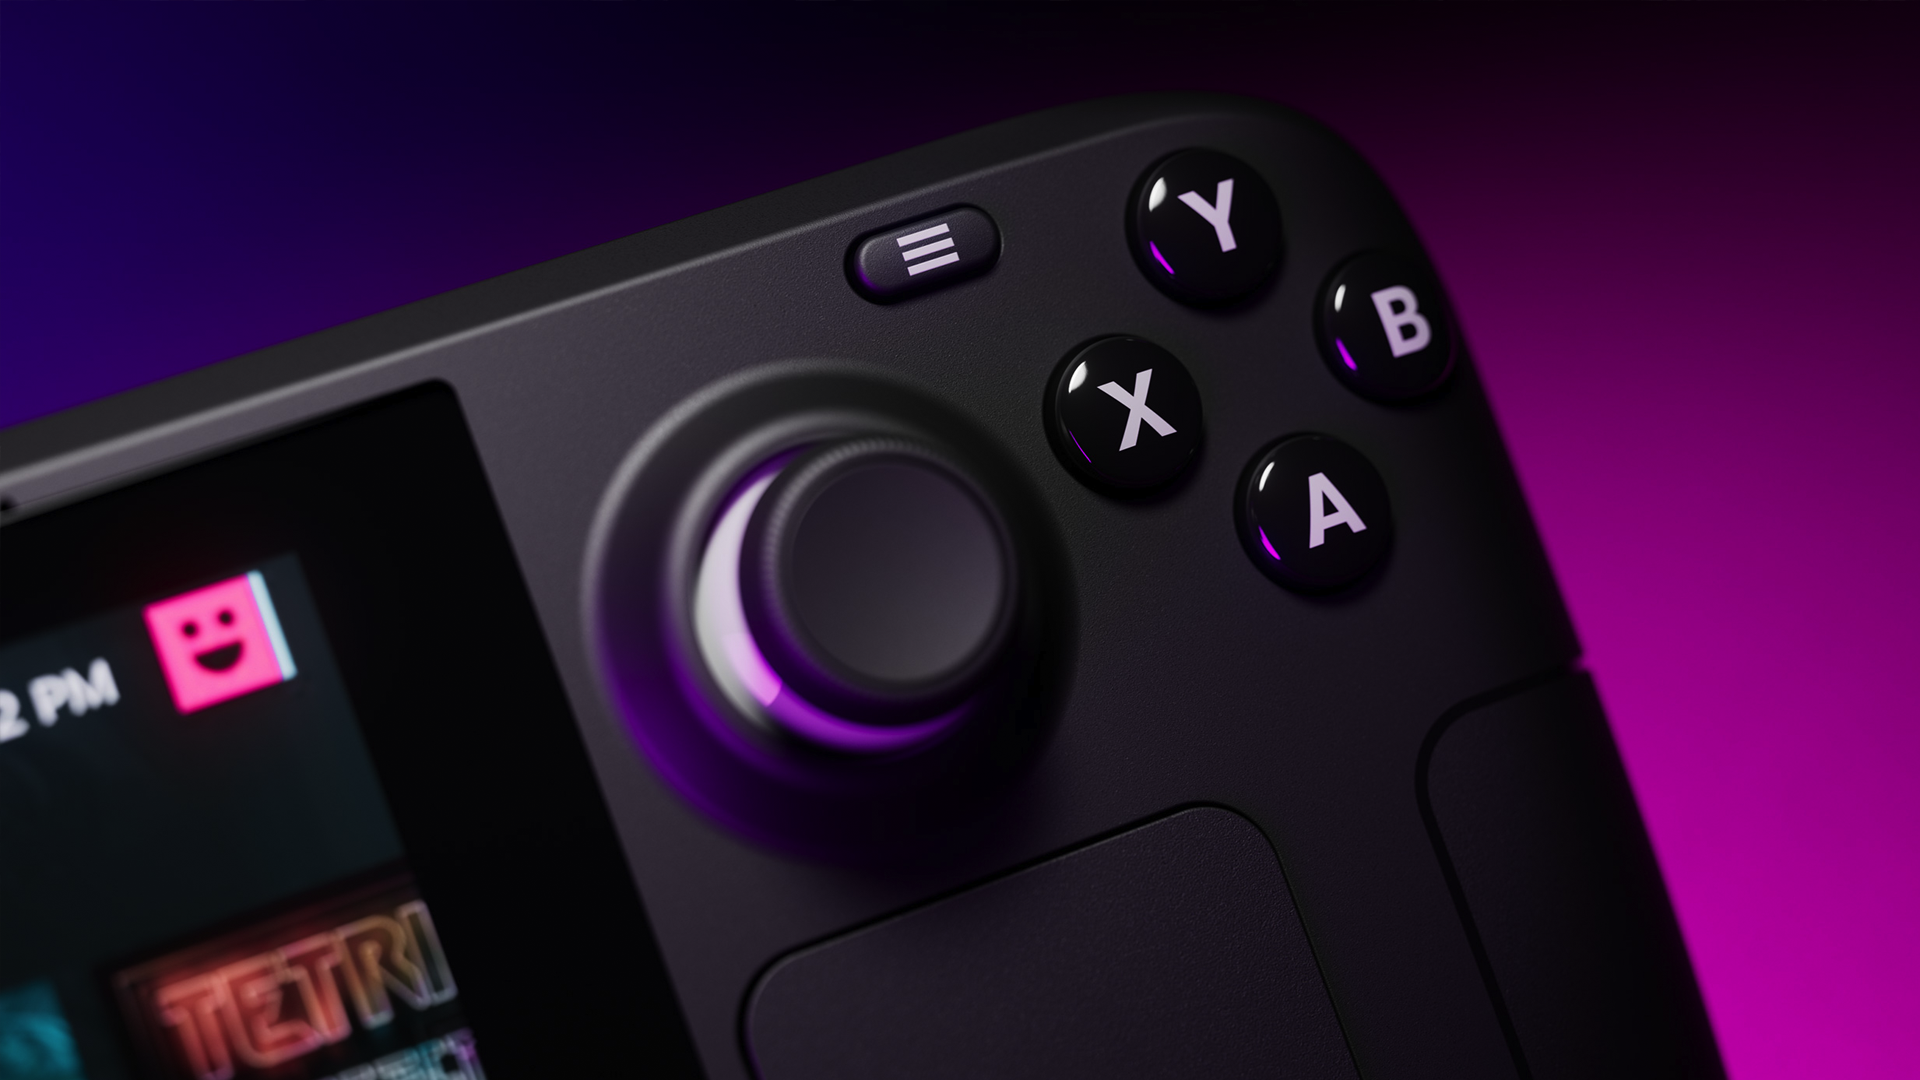 A close-up of the Steam Deck's right thumbstick and buttons.